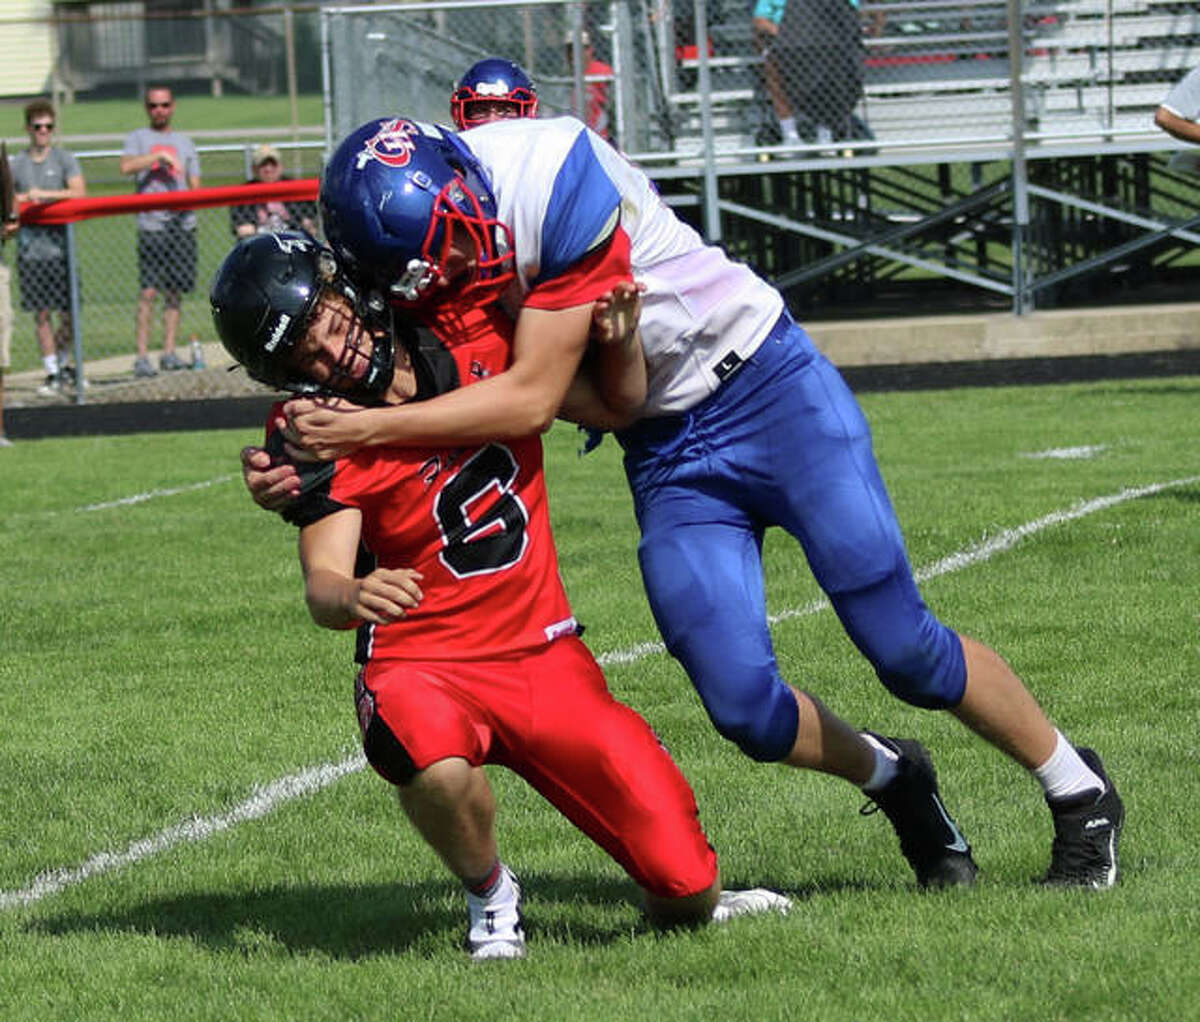 Carlinville’s Aaron Wills delivers a hit to Gibson City QB Kellen Deschepper (6), who just got off a pass under pressure on Saturday in Gibson City.